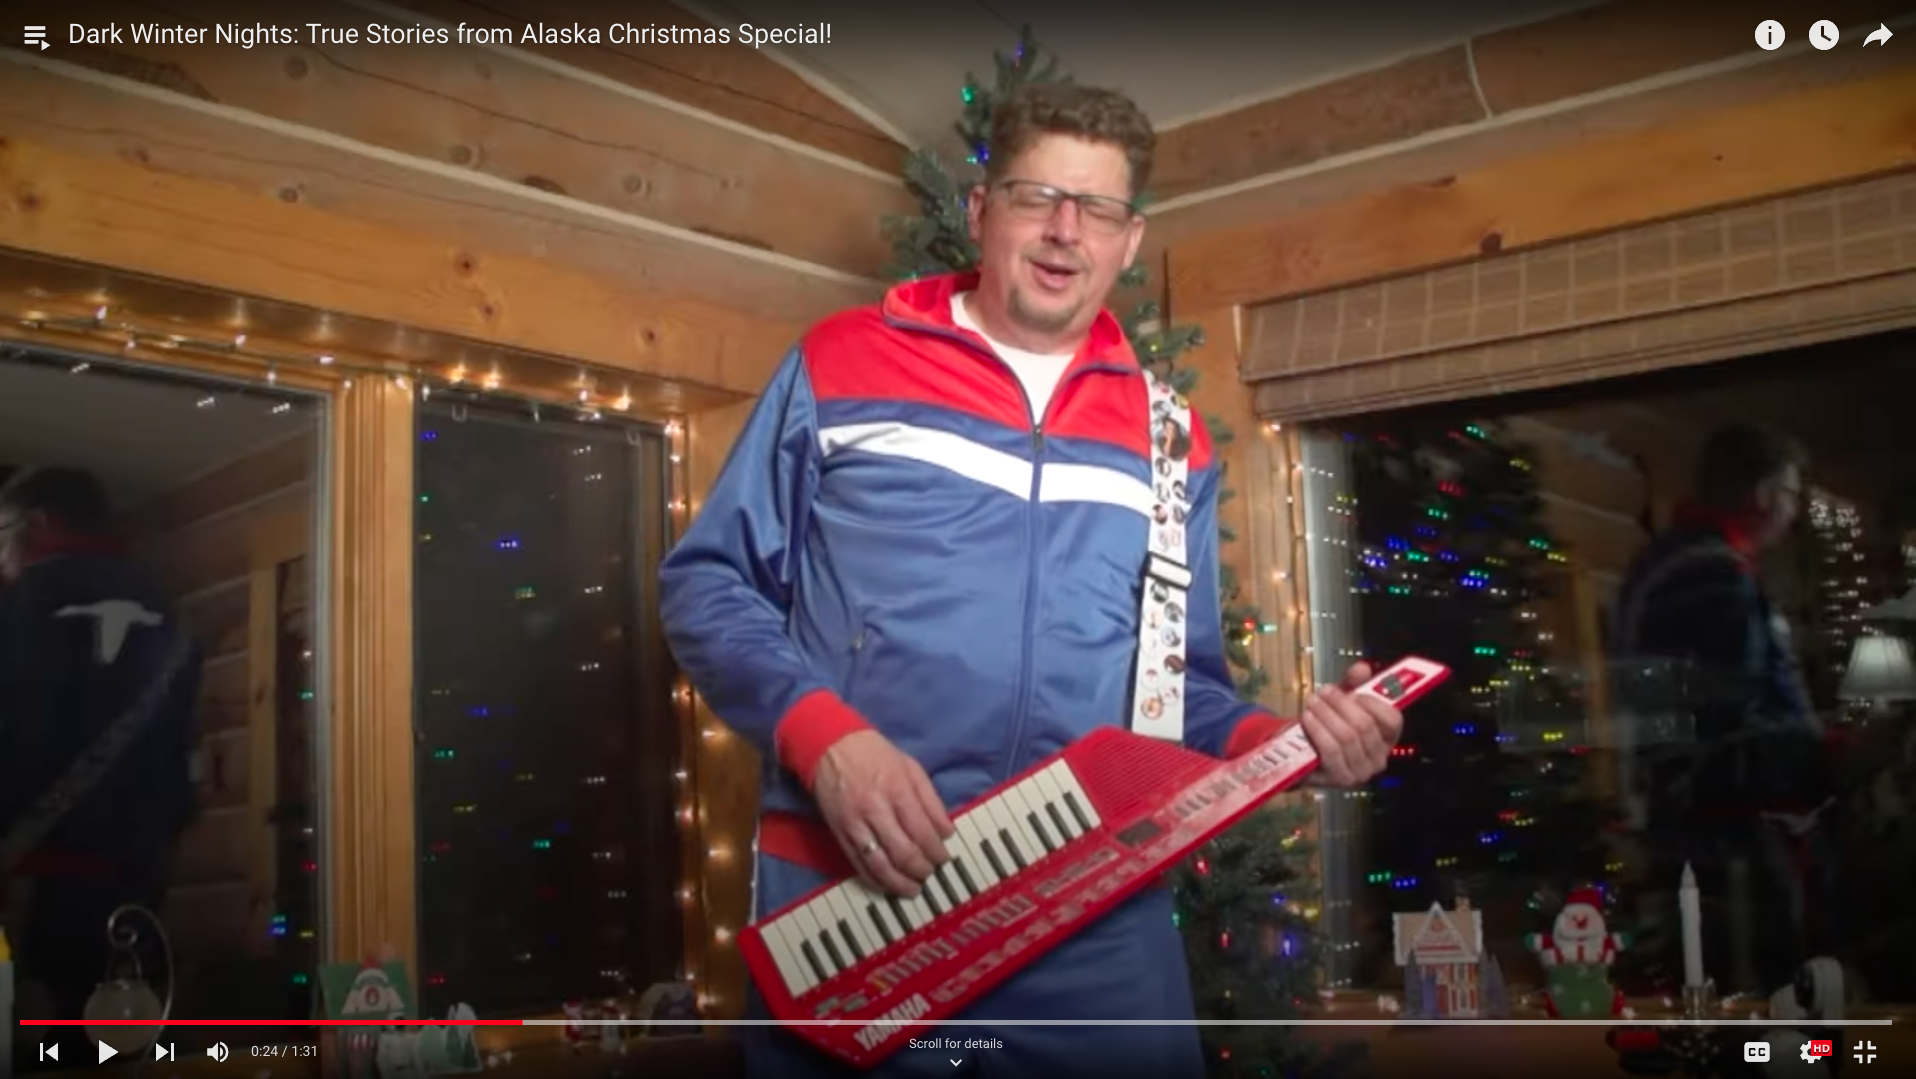 Rob Prince plays the keytar while hosting a Christmas party at his home for Dark Winter Nights: True Stories from Alaska Christmas Special debuting on Thursday, December 16 at 9:00pm on KUAC-TV channel 9.1. Photo Courtesy of Dark Winter Nights